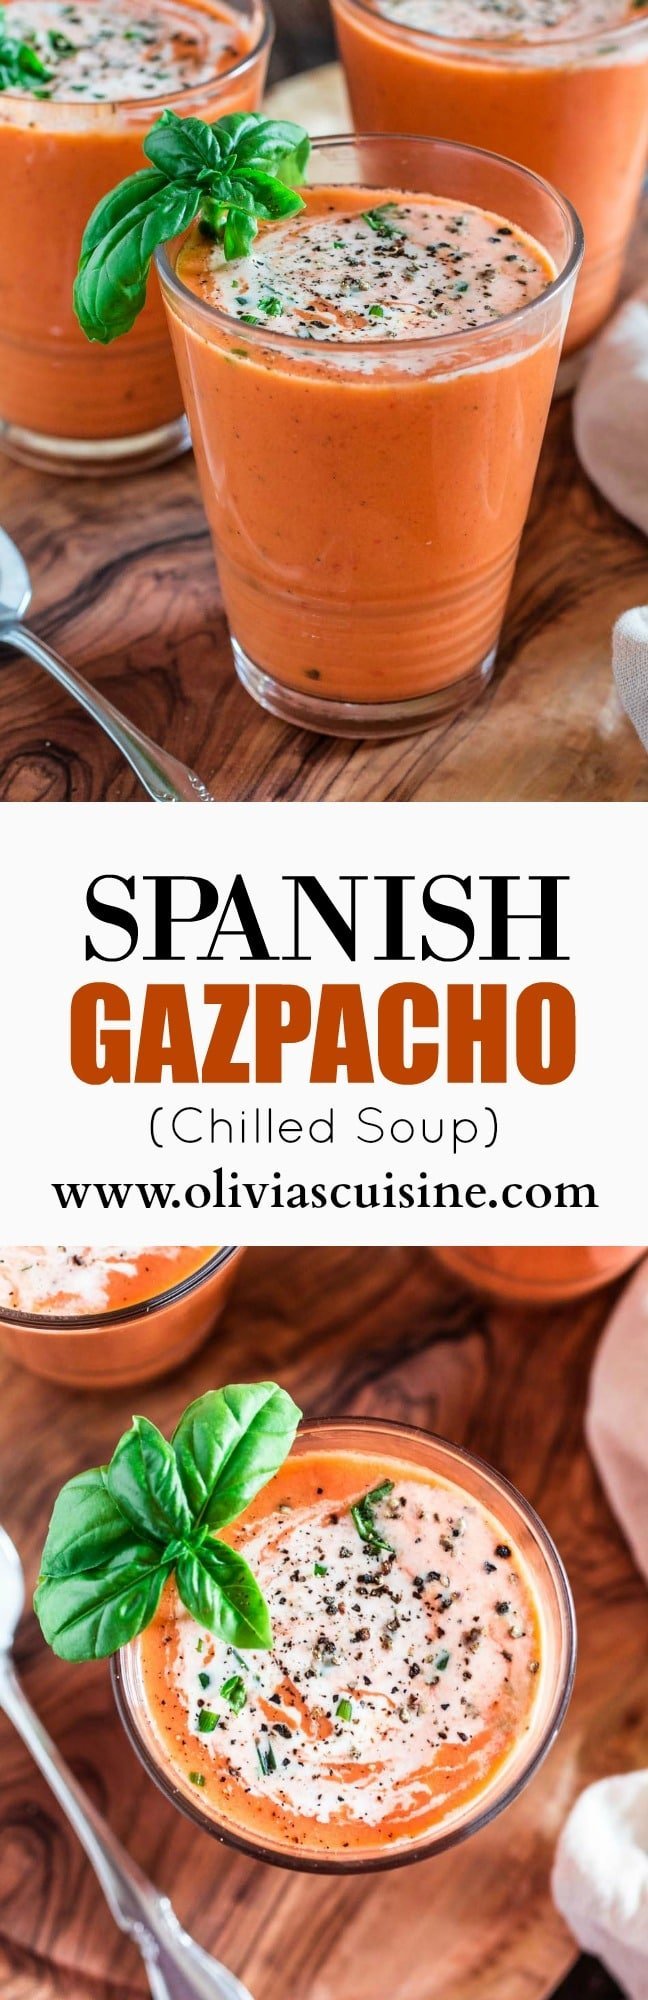 Spanish Gazpacho | www.oliviascuisine.com | This light and smooth cold soup is best made during summertime, when you can find the best and sweetest tomatoes.